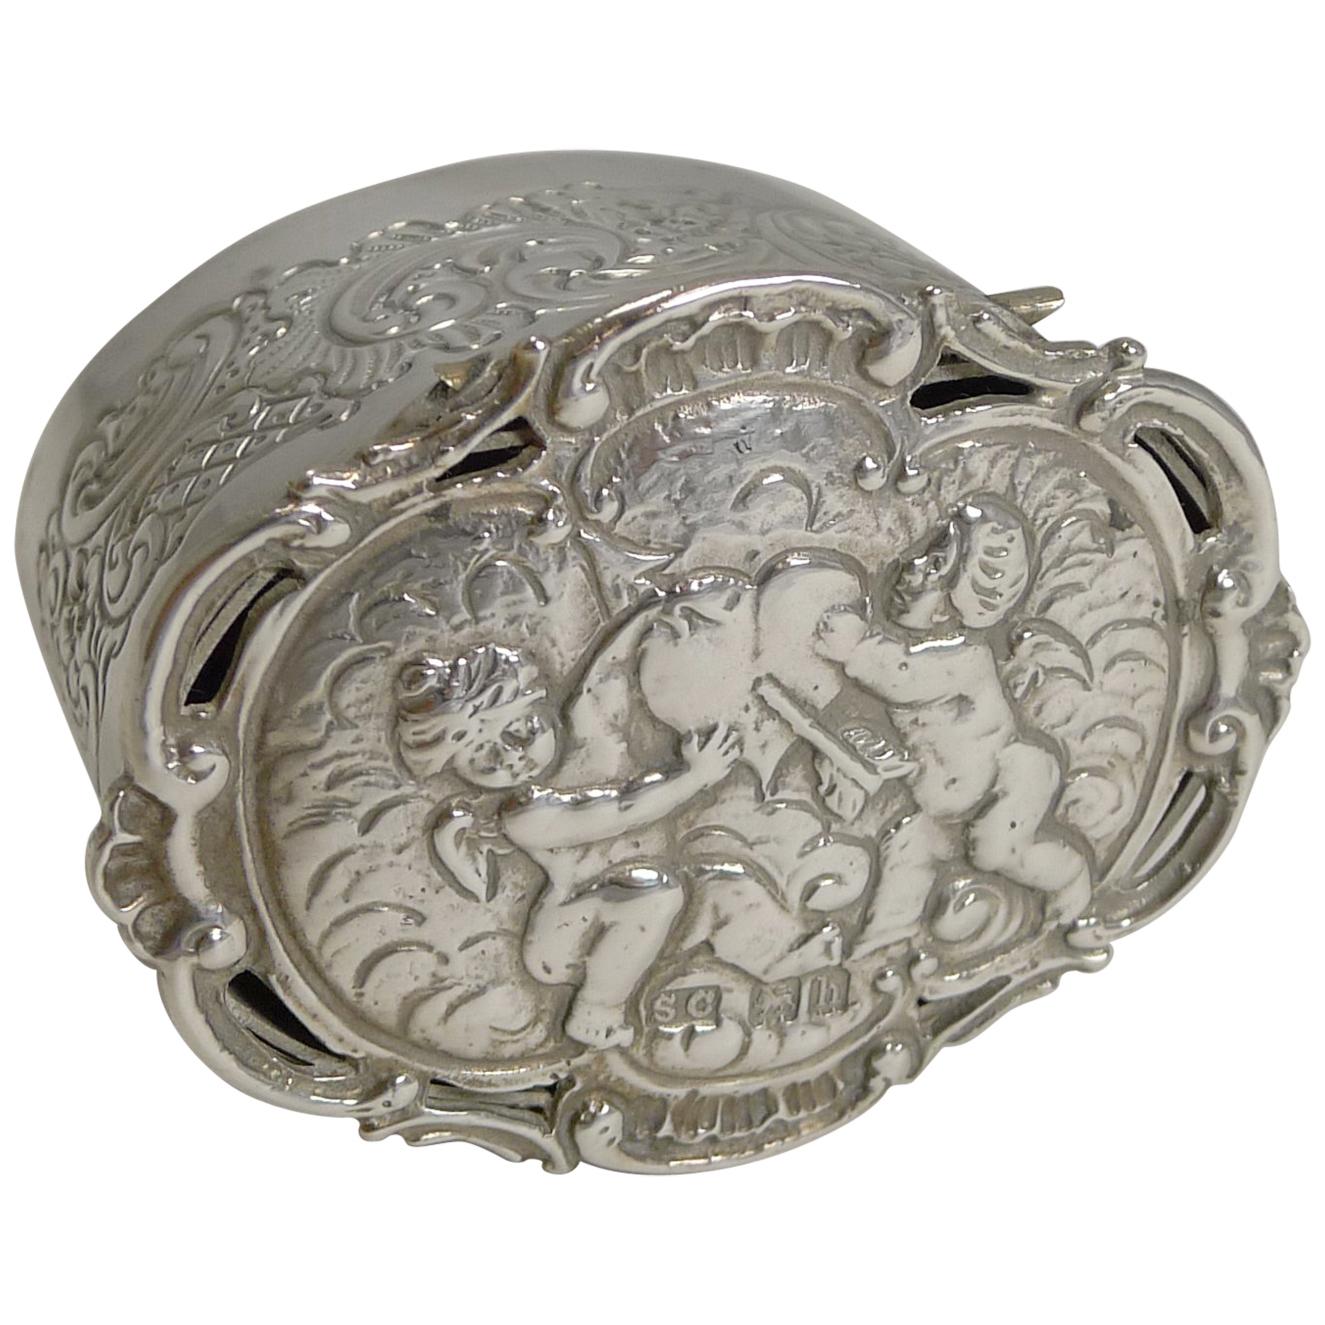 Romantic Antique English Sterling Silver Box, Cherubs and Heart